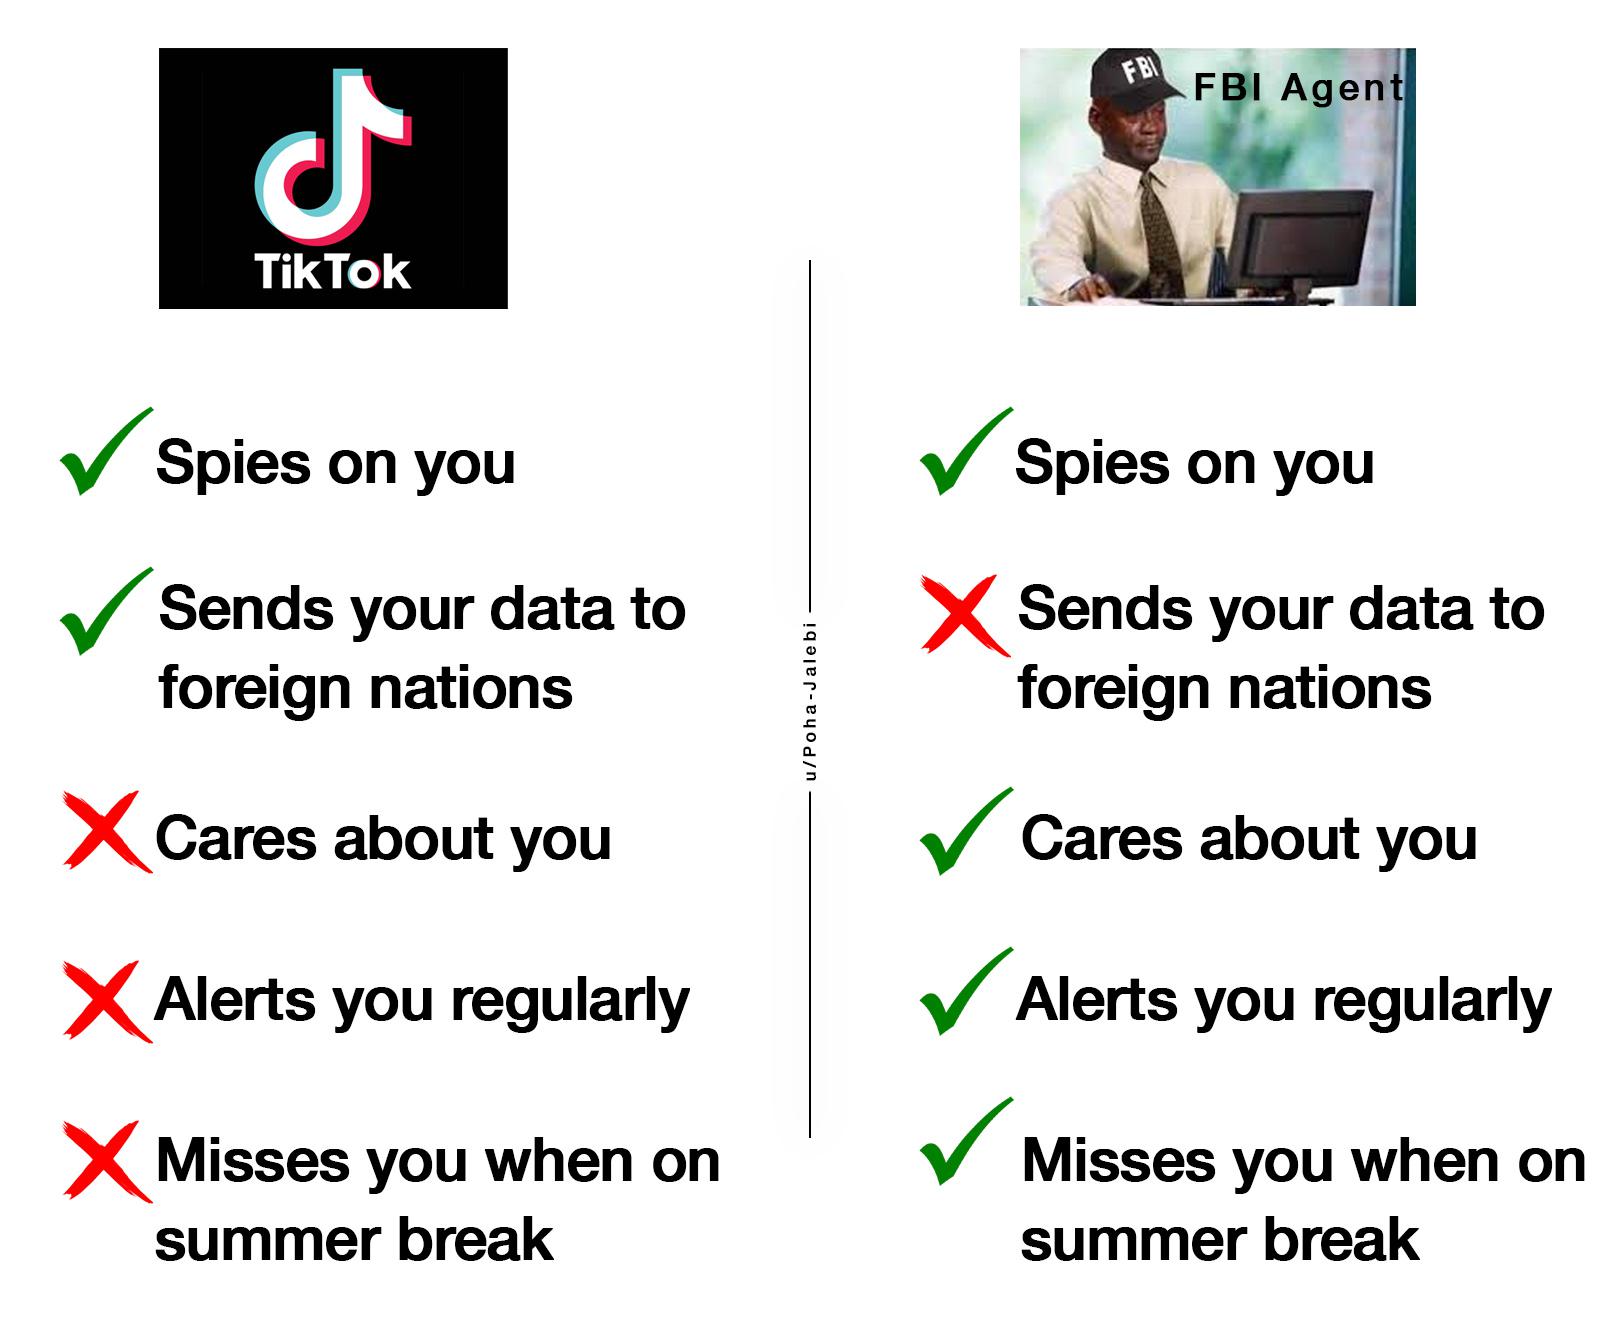 Dank, NSA, American, USA, Five_Eyes, FBI Agent Dank Memes Dank, NSA, American, USA, Five_Eyes, FBI Agent text: F Age TikTok Spies on you Sends your data to foreign nations X Cares about you x Alerts you regularly x Misses you when on summer break Spies on you X Sends your data to foreign nations Cares about you Alerts you regularly Misses you when on summer break 